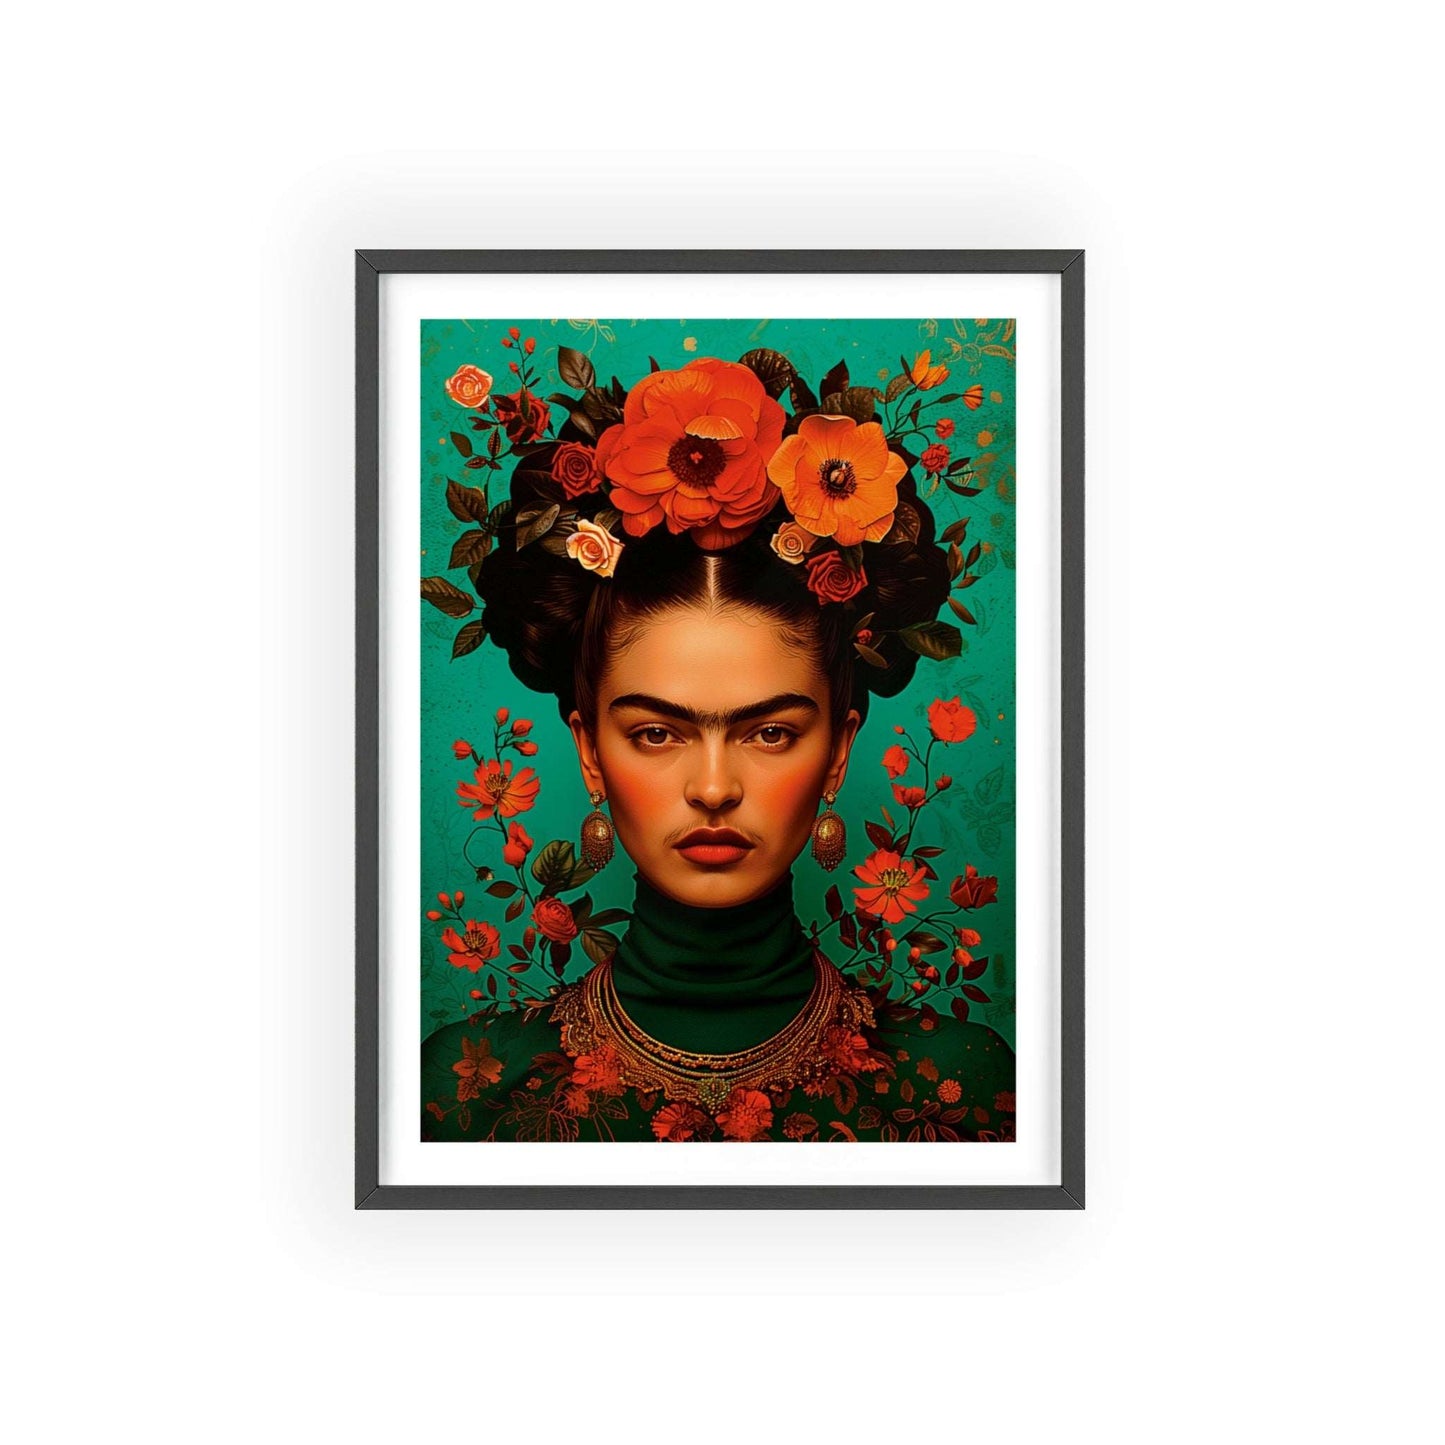 This "Kahlo is Kool" Frida Kahlo portrait poster, featuring a stunning aquamarine palette and a captivating design